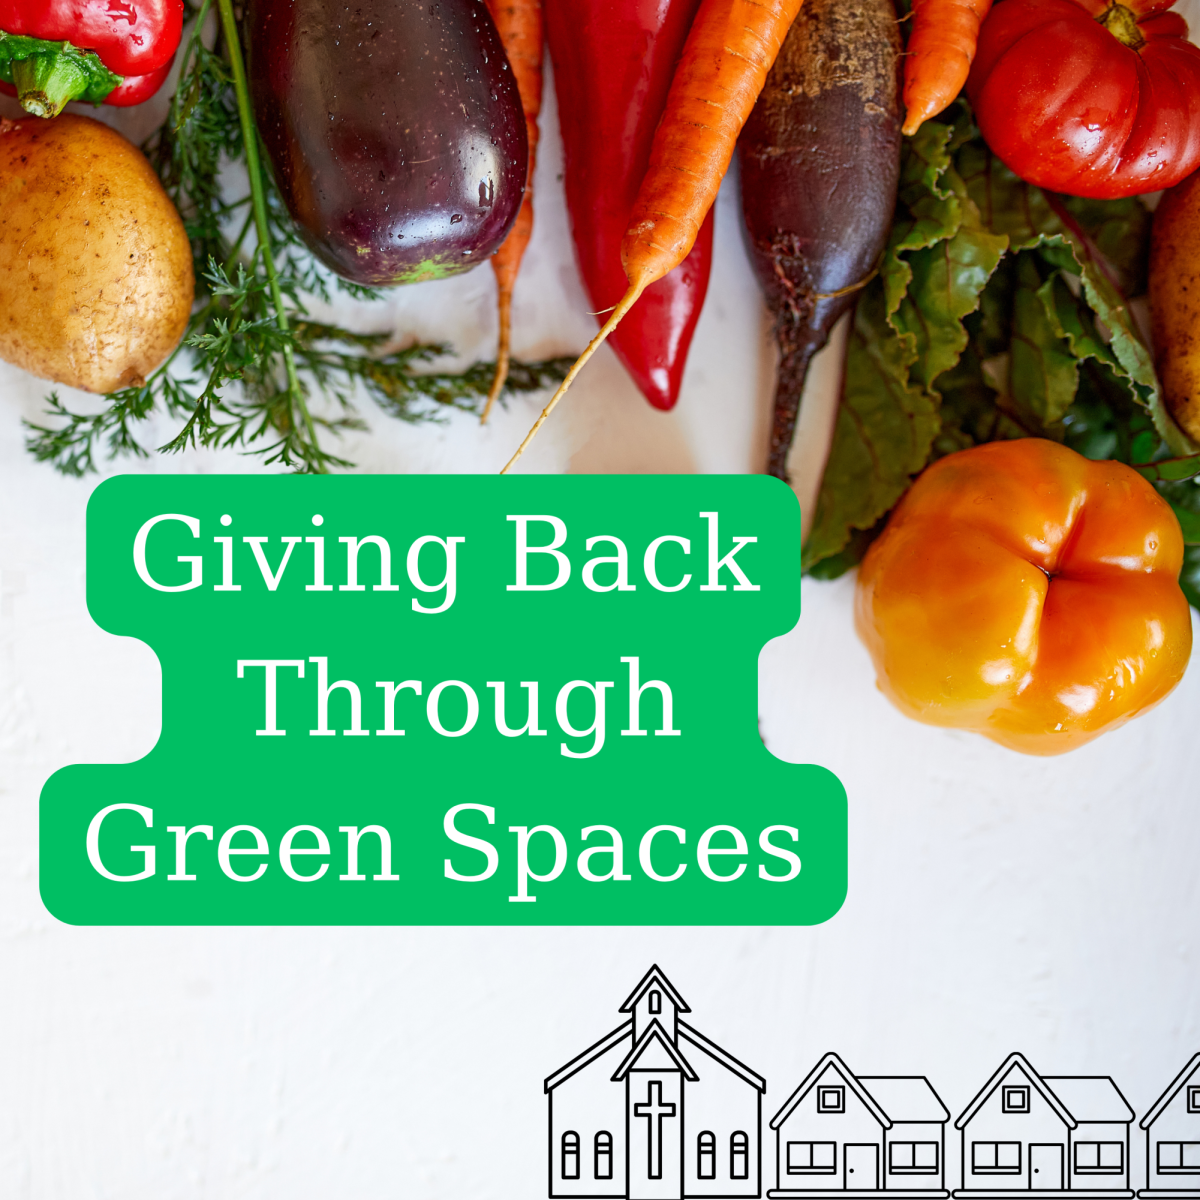 Giving Back Through Green Spaces